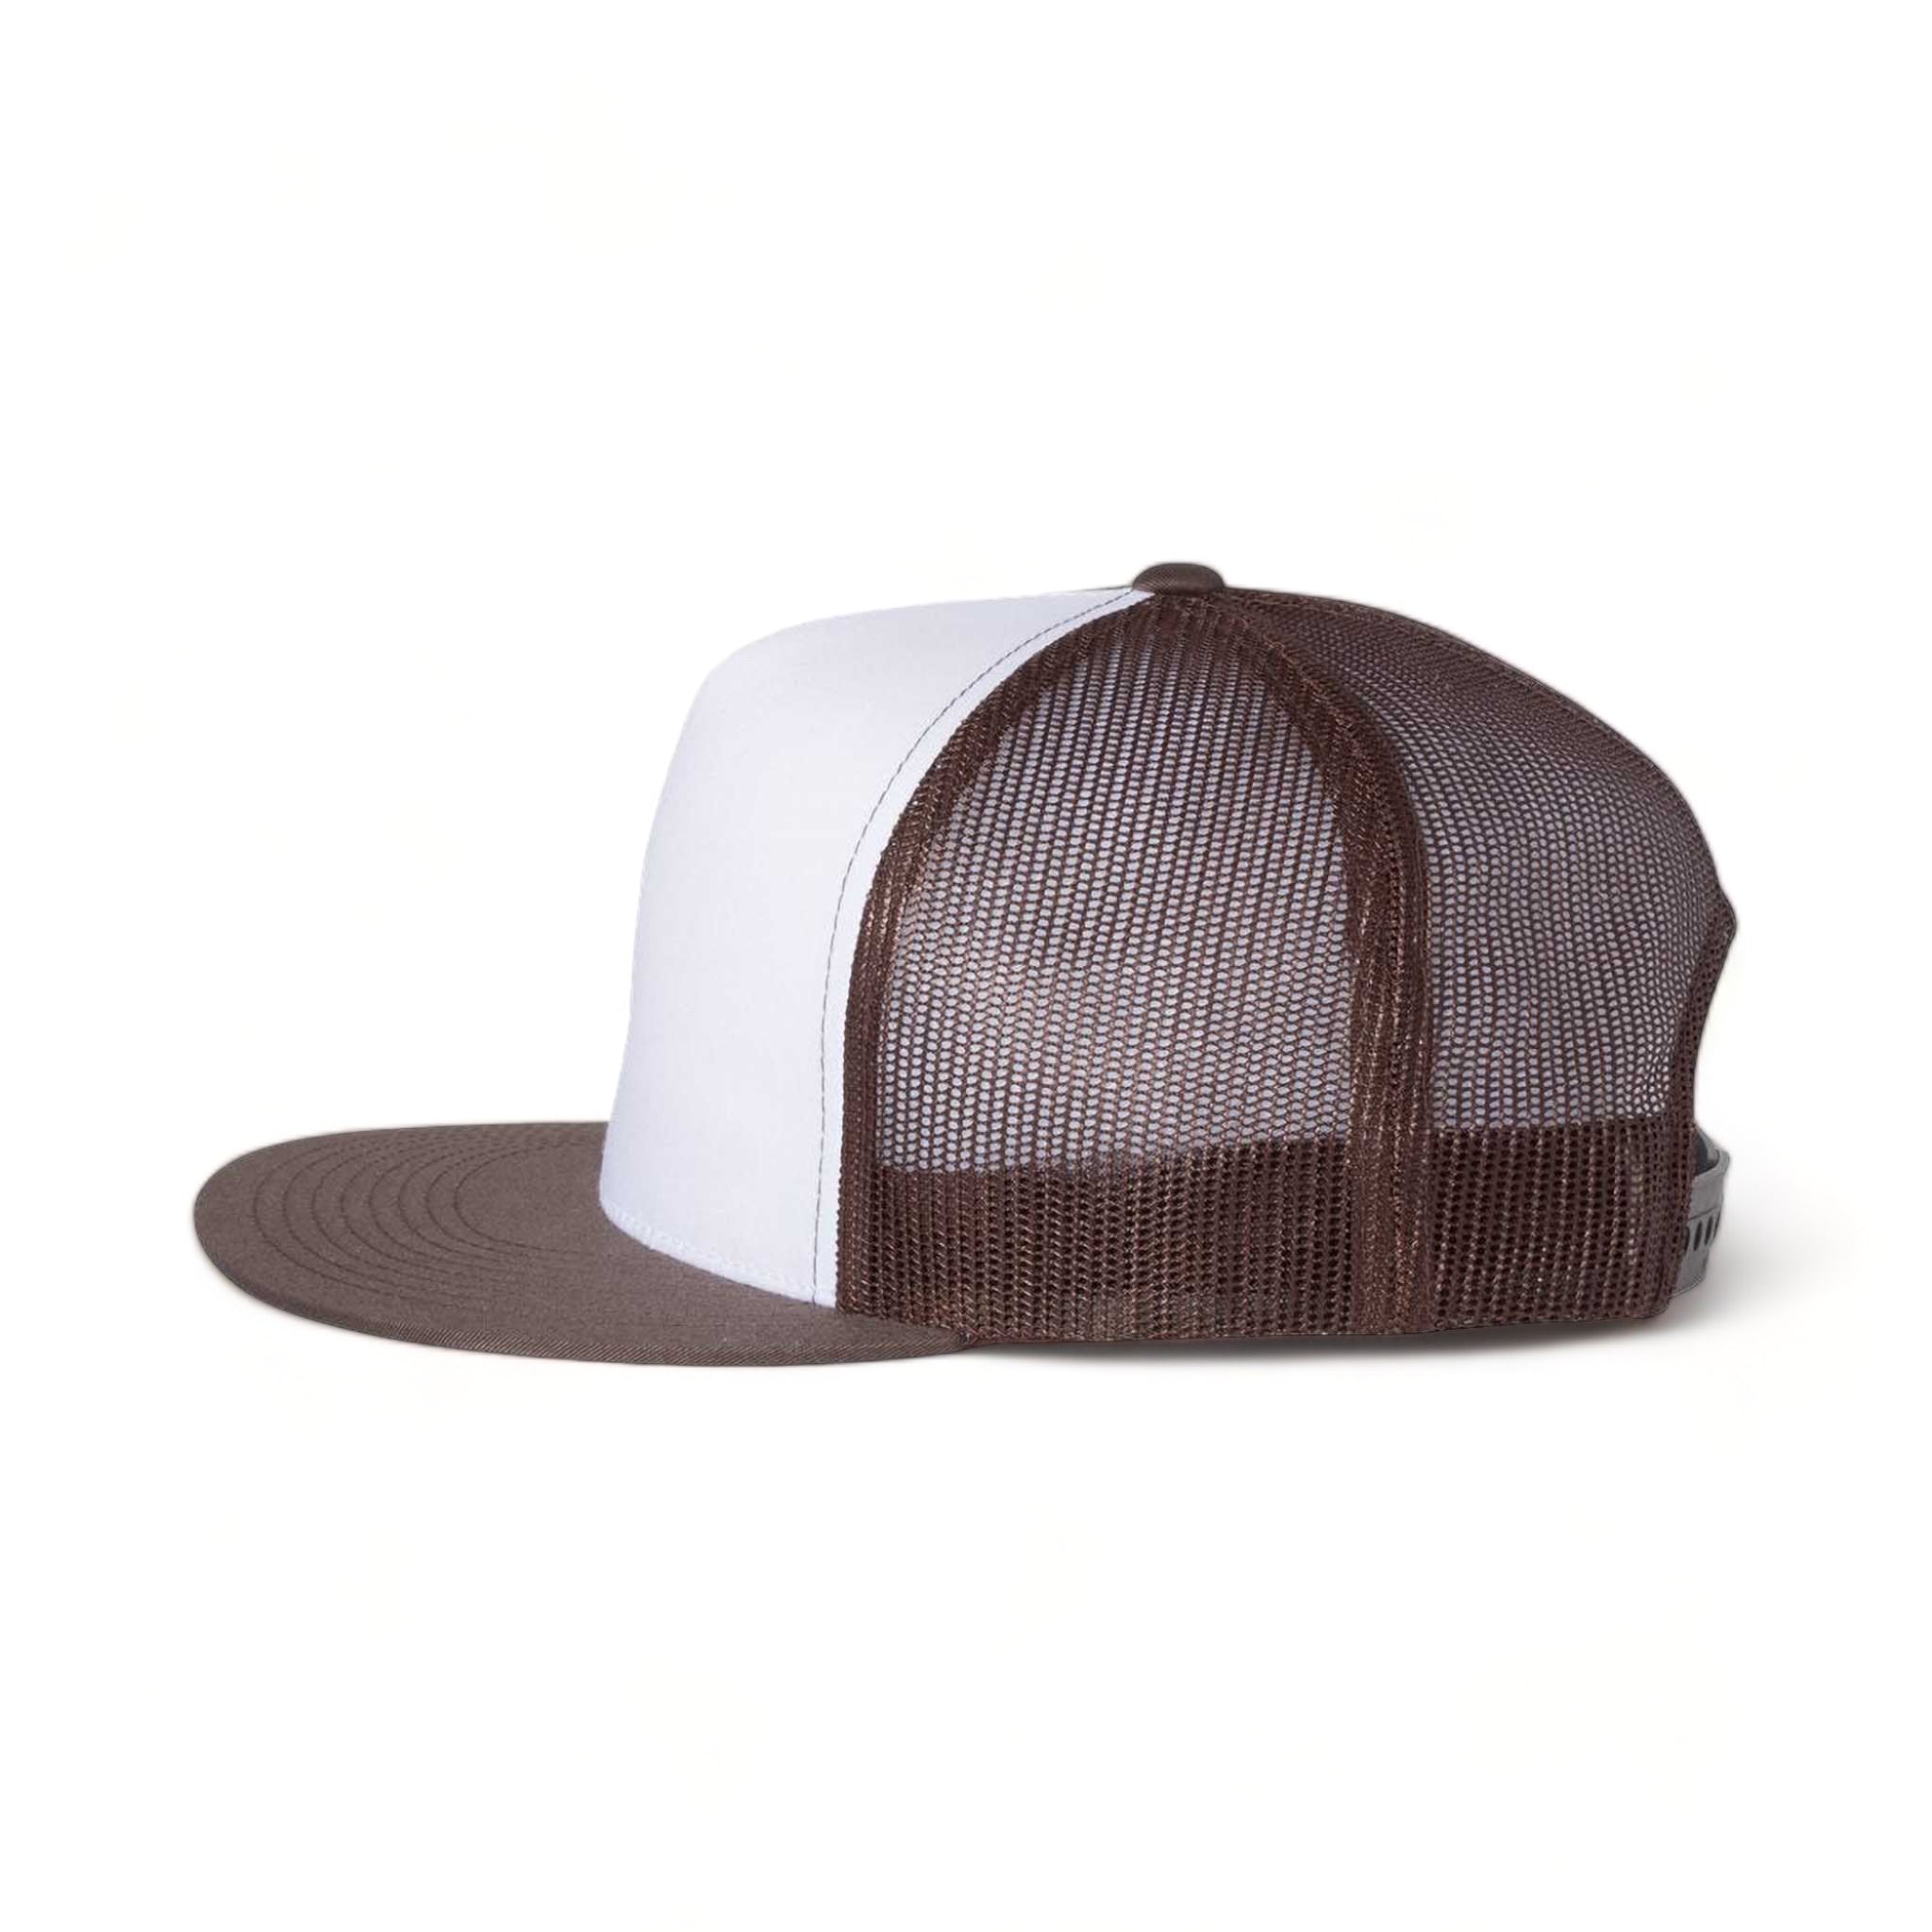 Side view of YP Classics 6006 custom hat in brown, white and brown